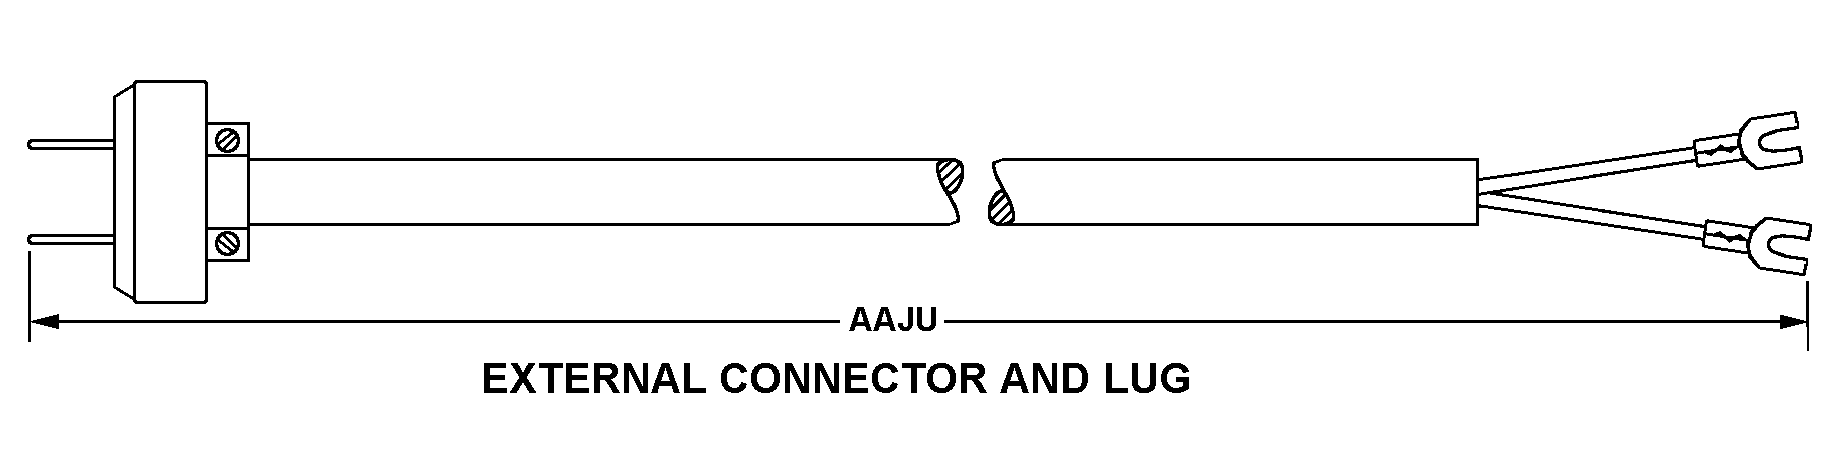 EXTERNAL CONNECTOR AND LUG style nsn 5995-00-252-5847